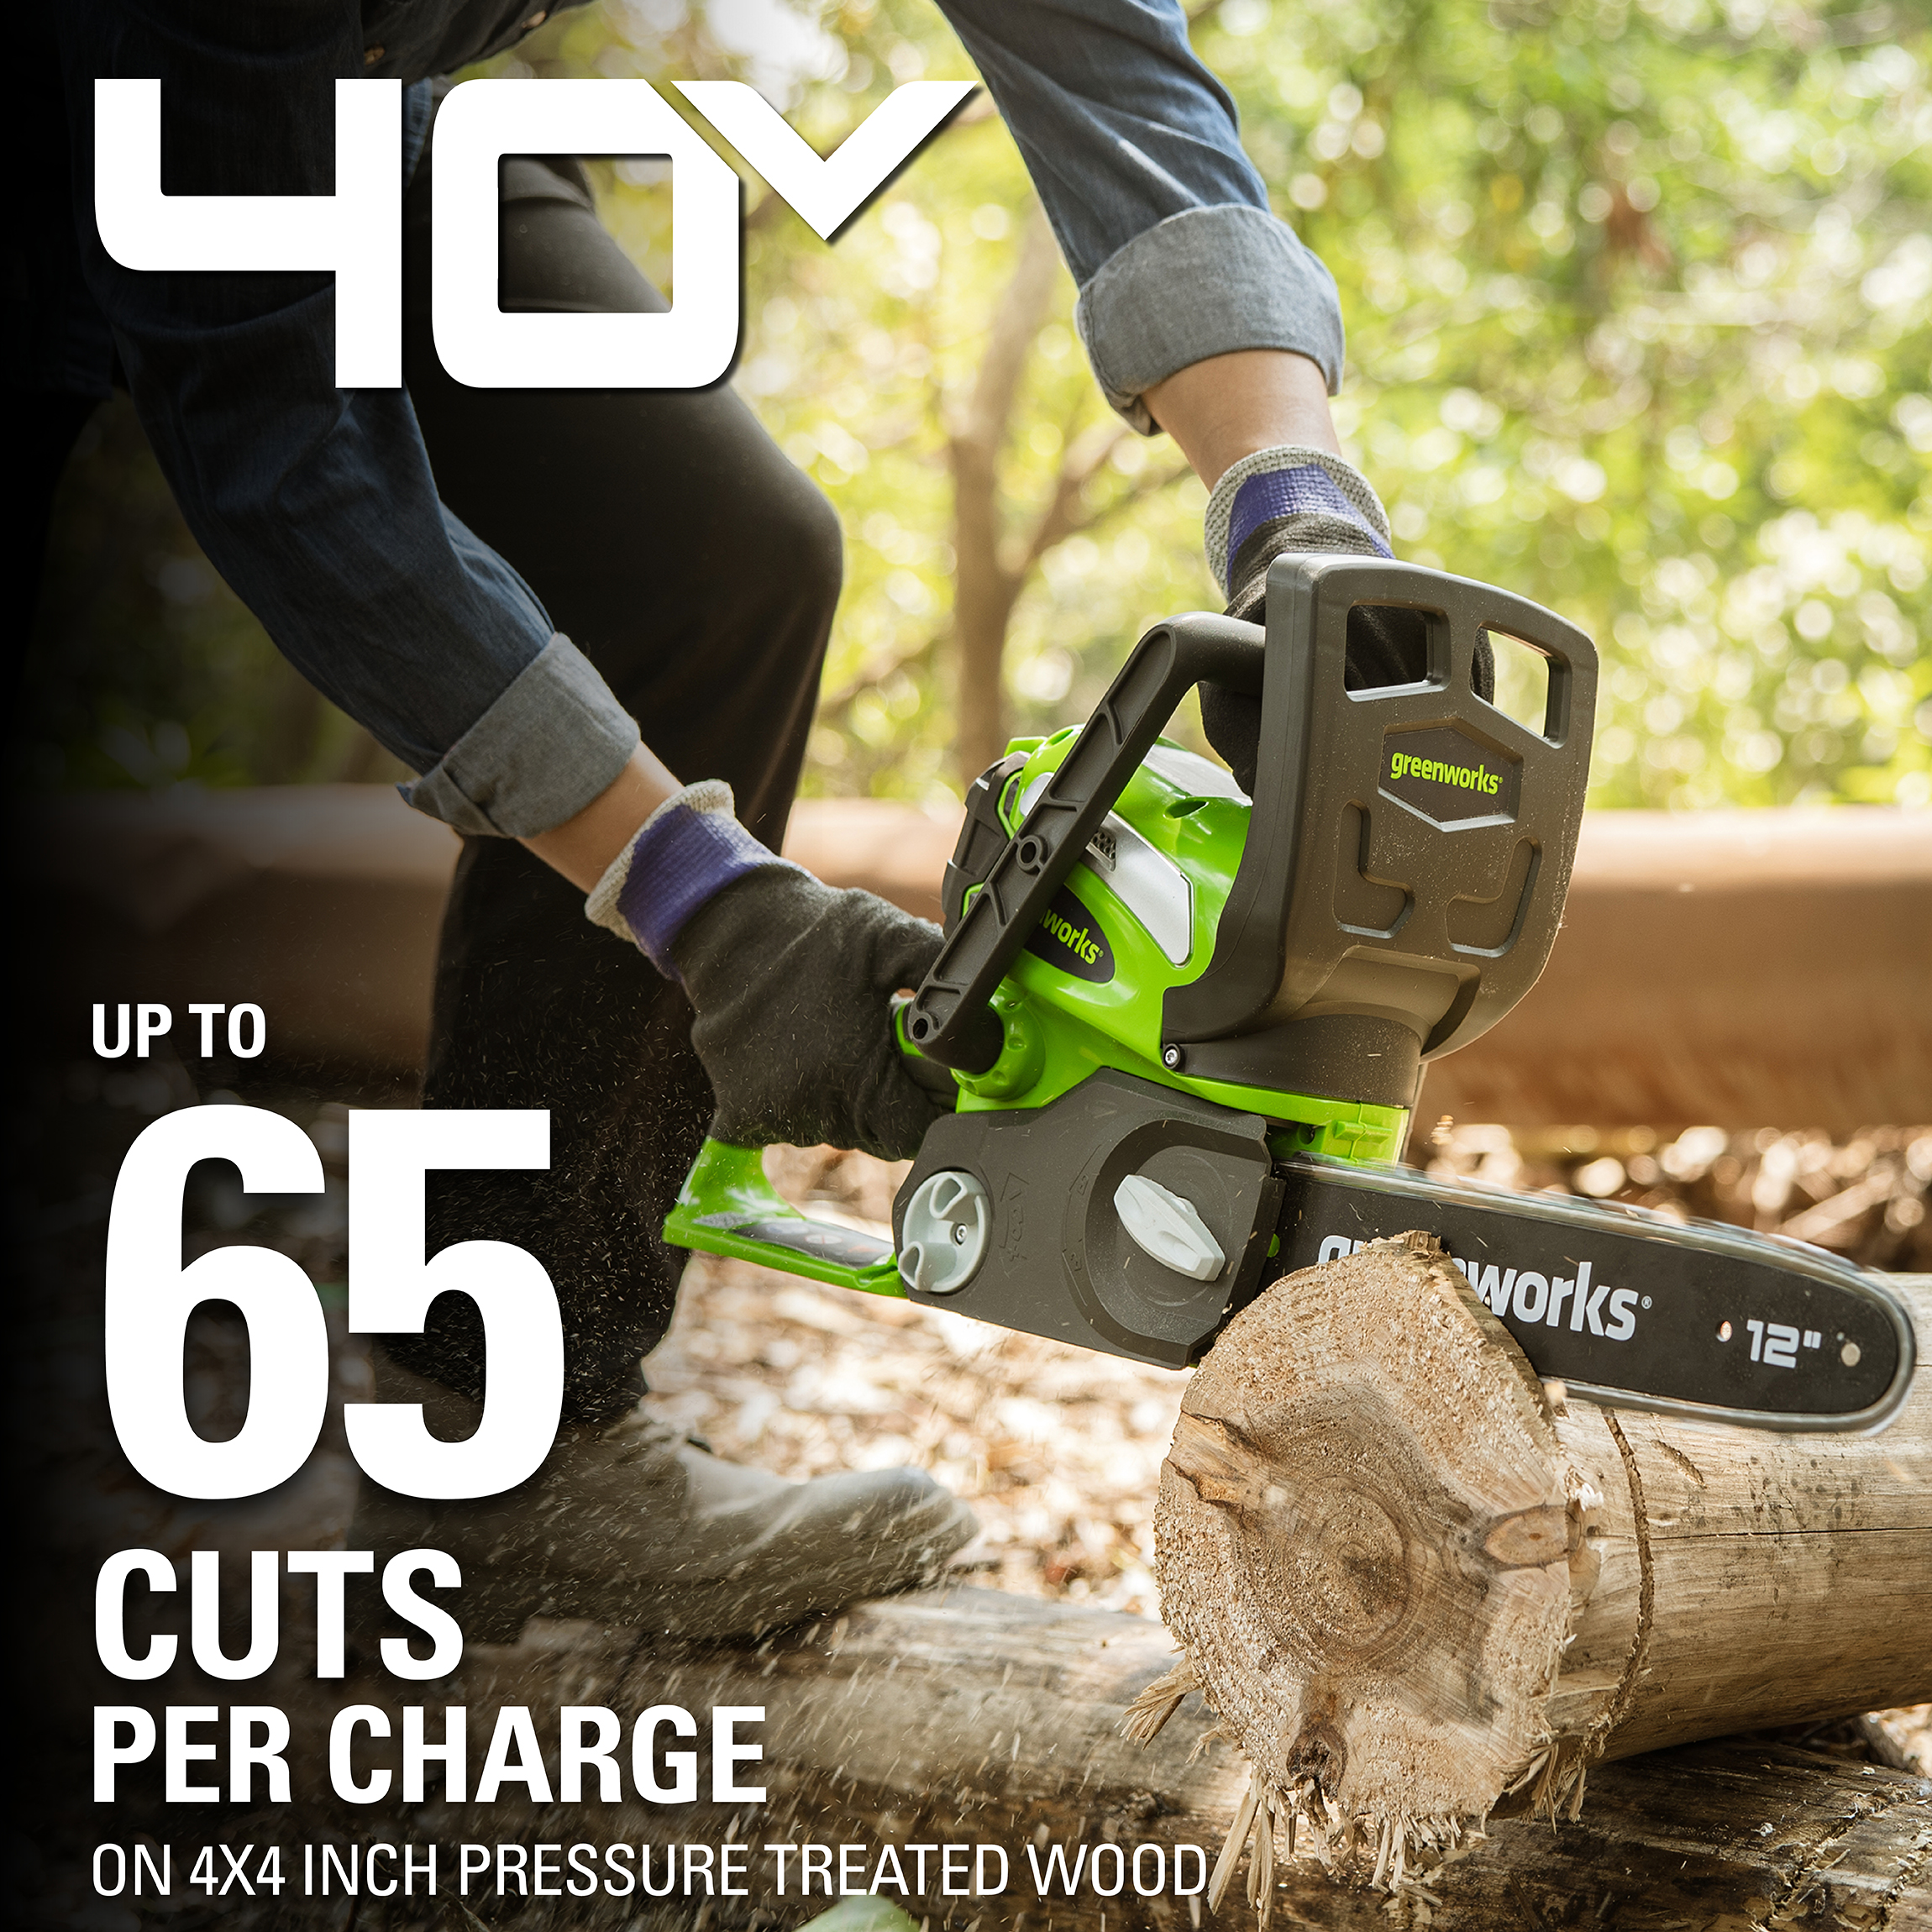 GreenWorks 20292 40V 12" Cordless Chainsaw, Battery and Charger Sold Separately - image 7 of 14